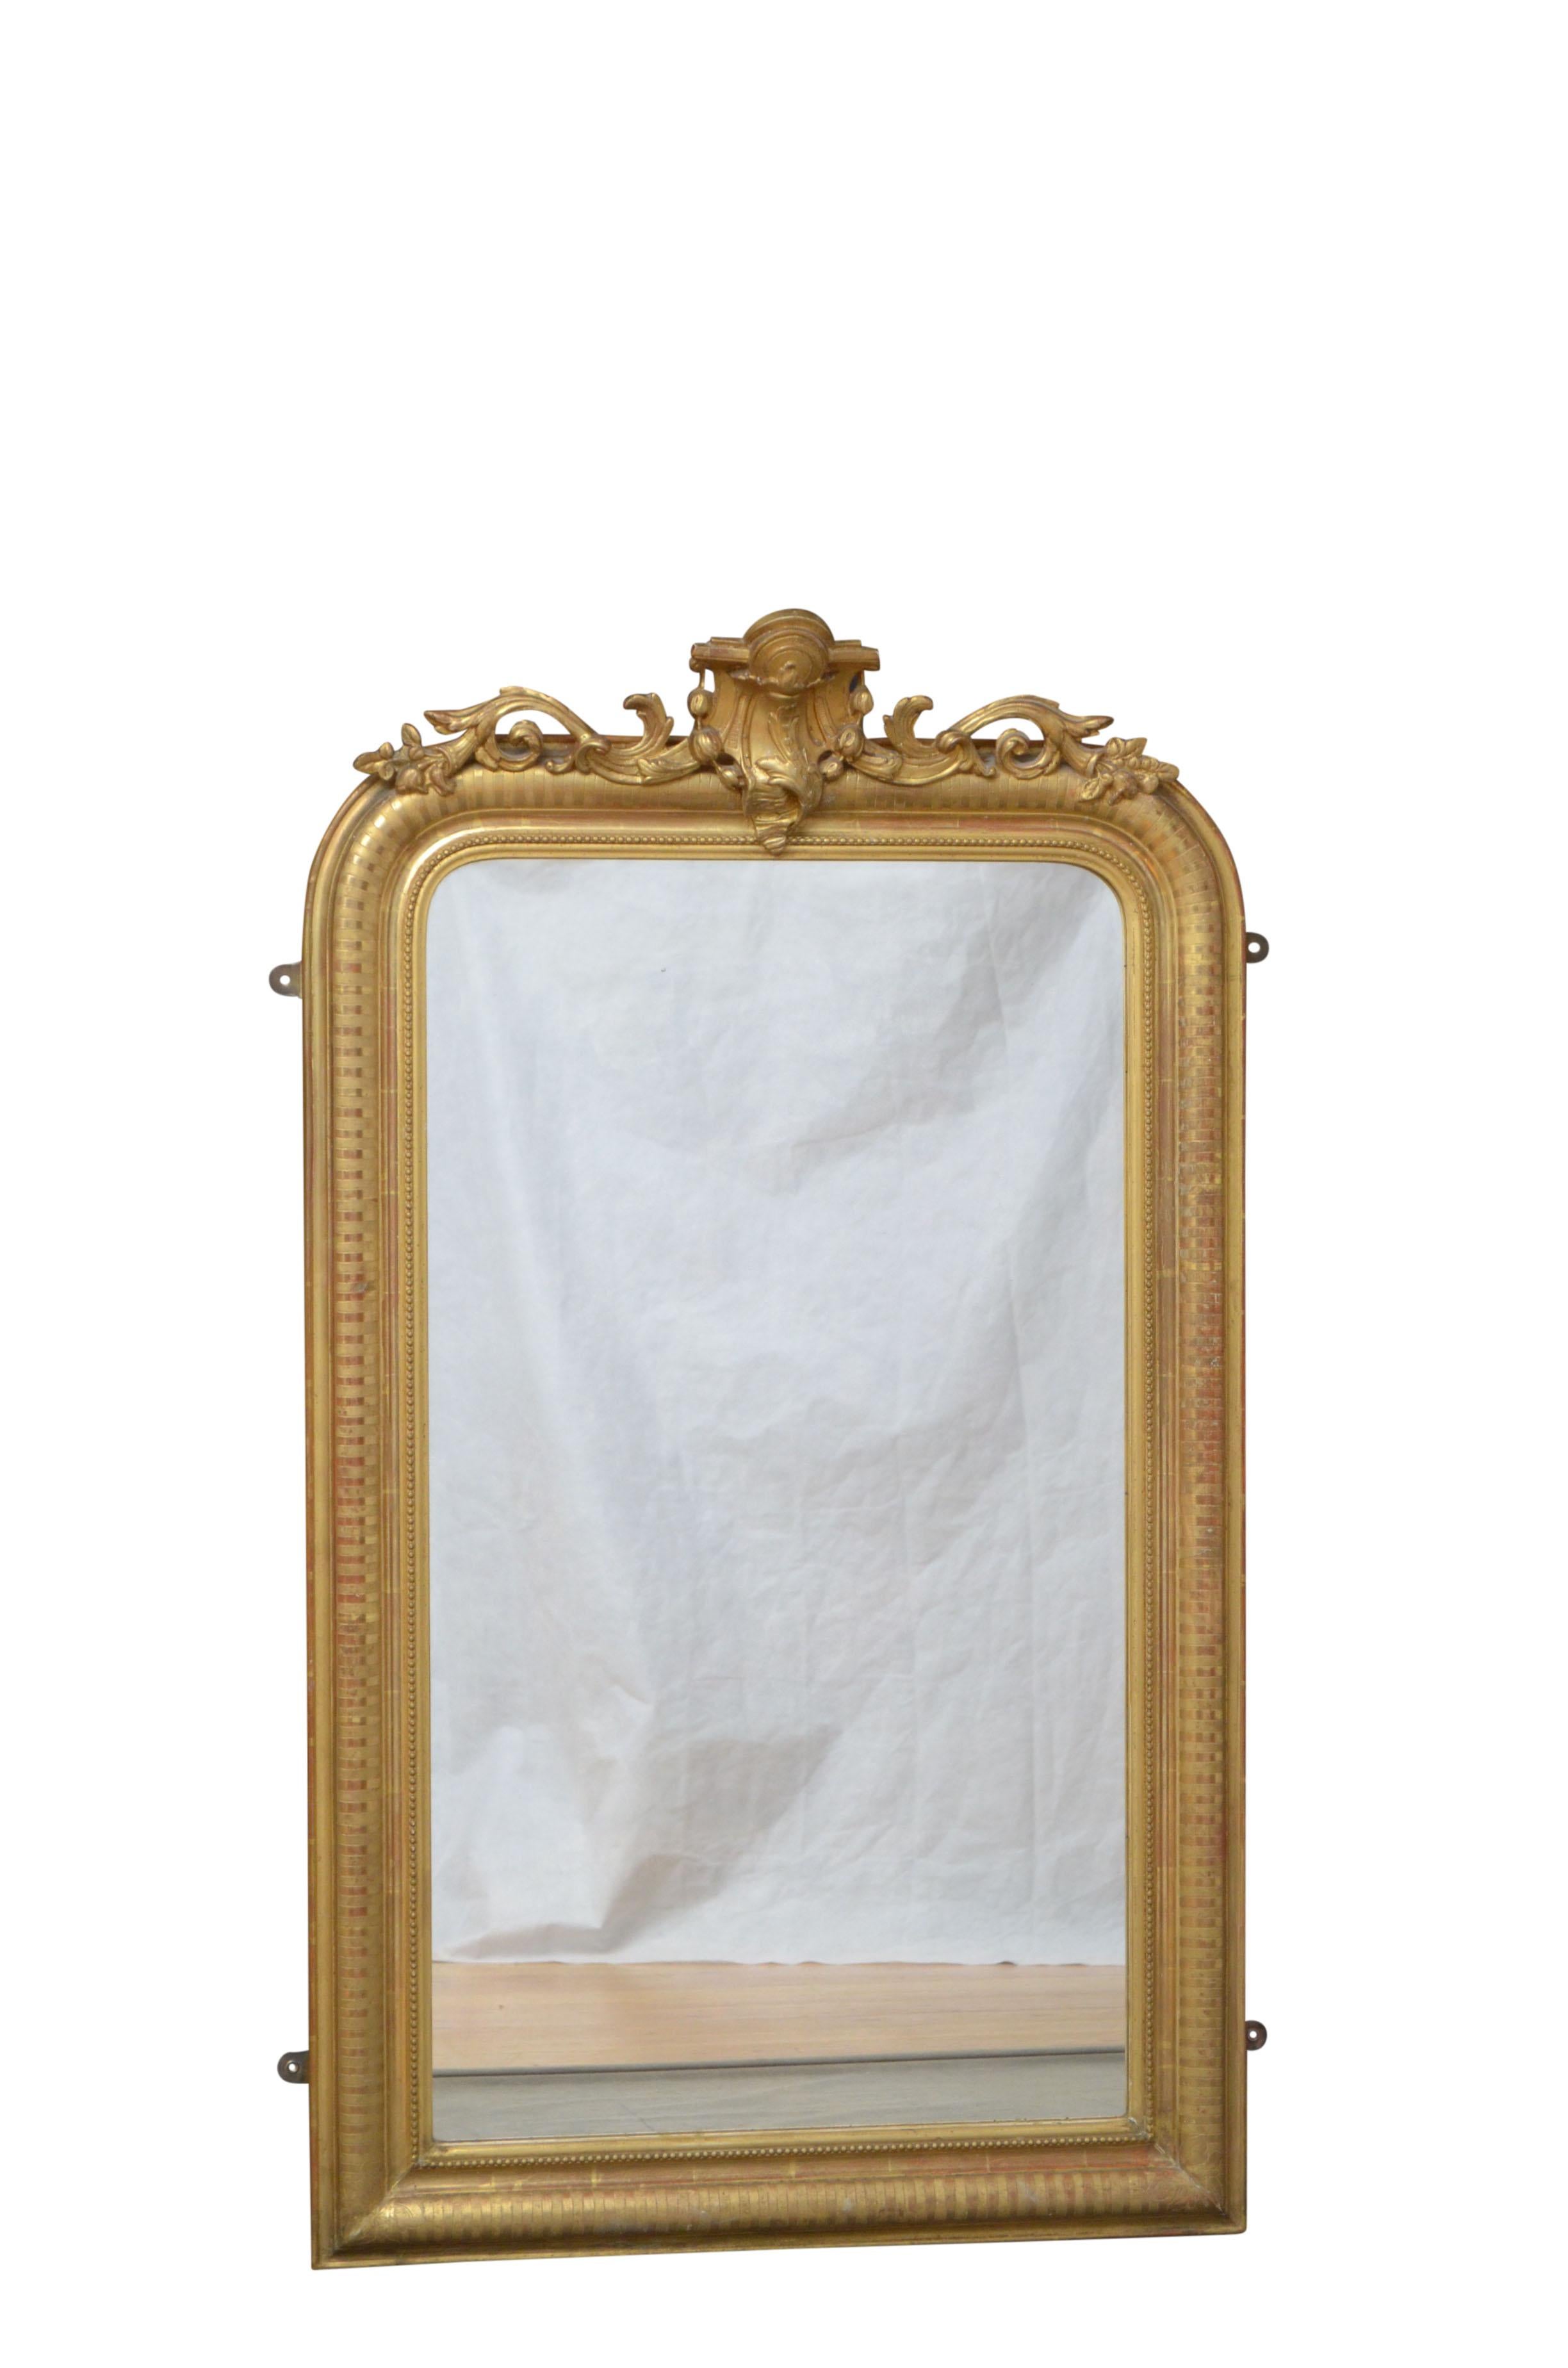 Very elegant Louis Philippe gilt wall mirror, having original glass with some foxing in beaded and carved gilded frame with floral crest to the centre. This antique mirror retains its original glass and gilt, repayment backboards, all in wonderful